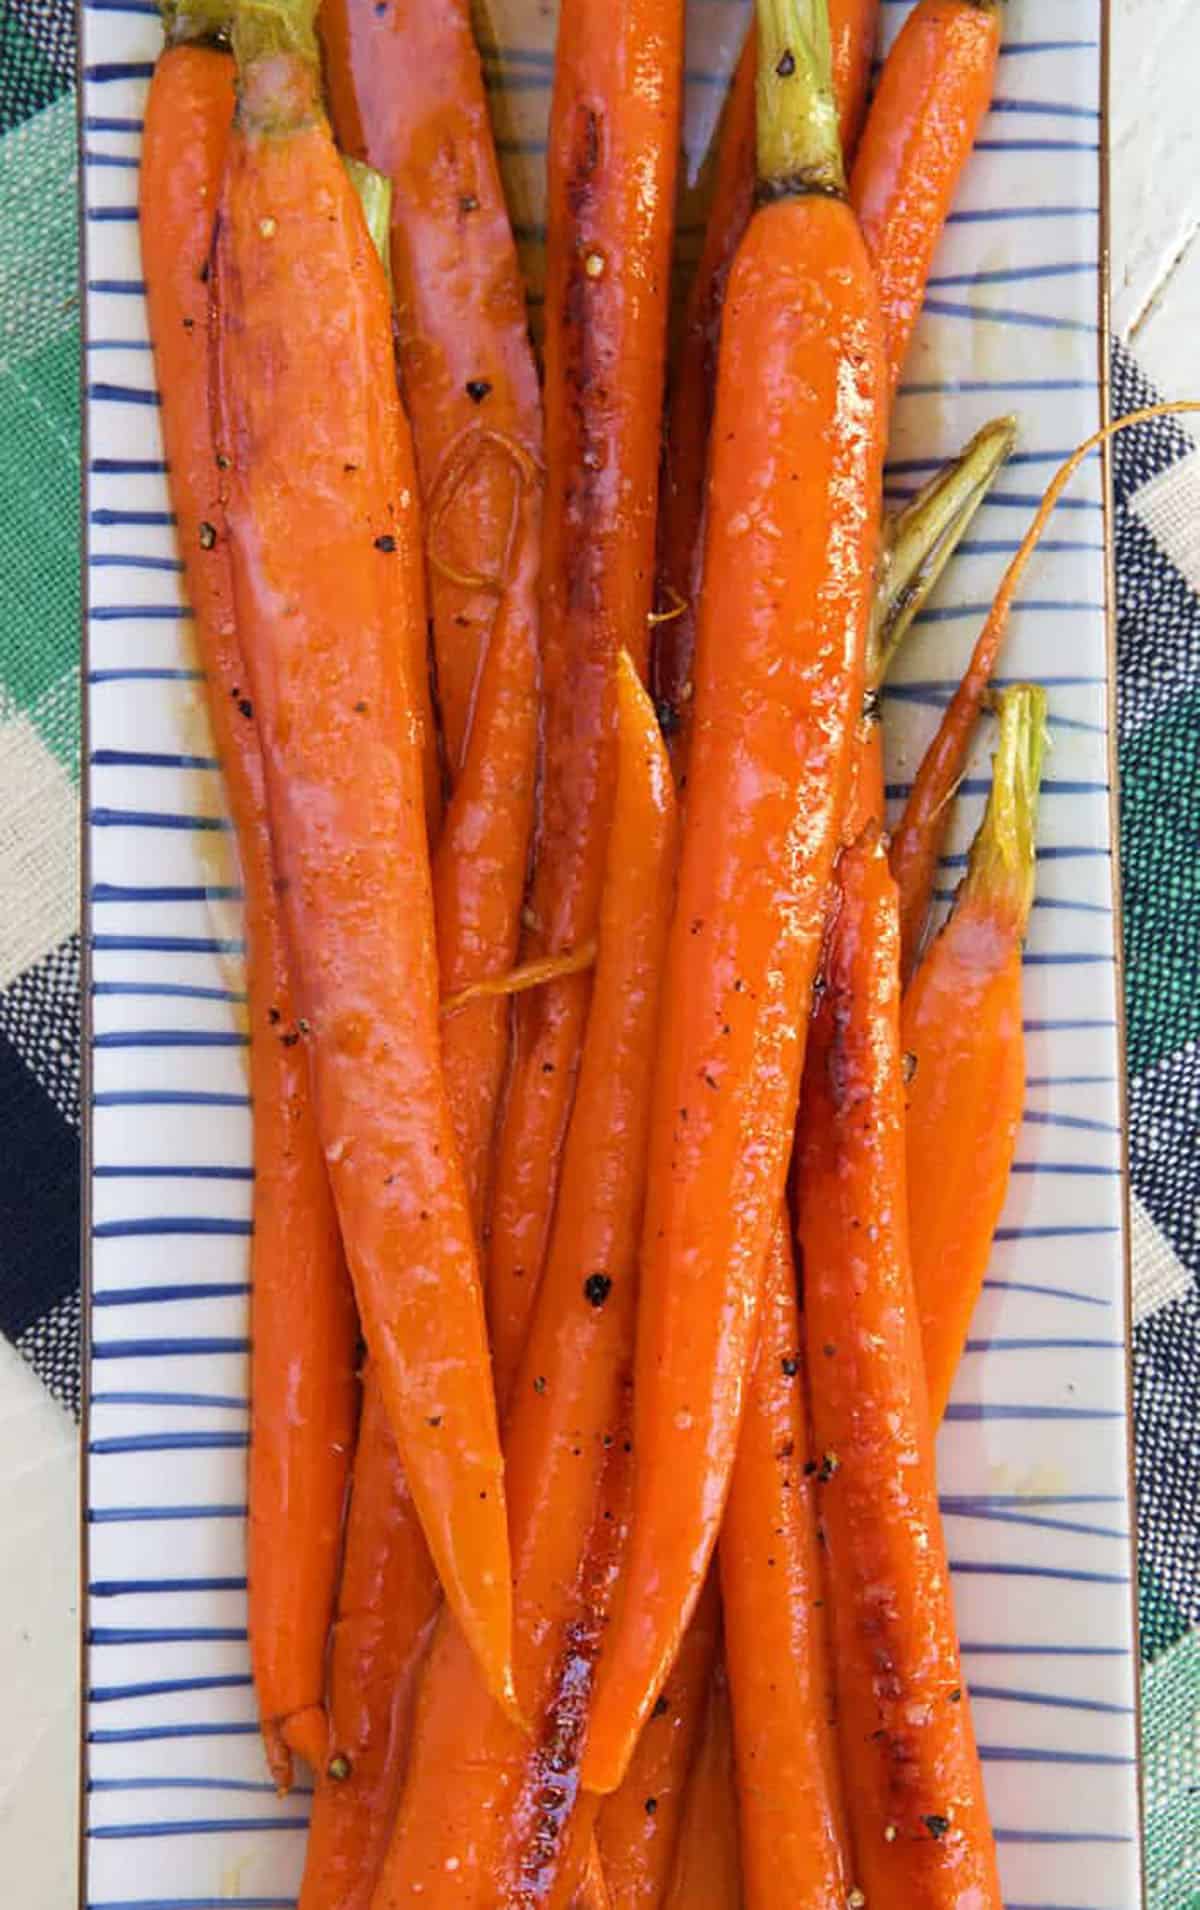 Honey glazed carrots are placed on a striped plate.